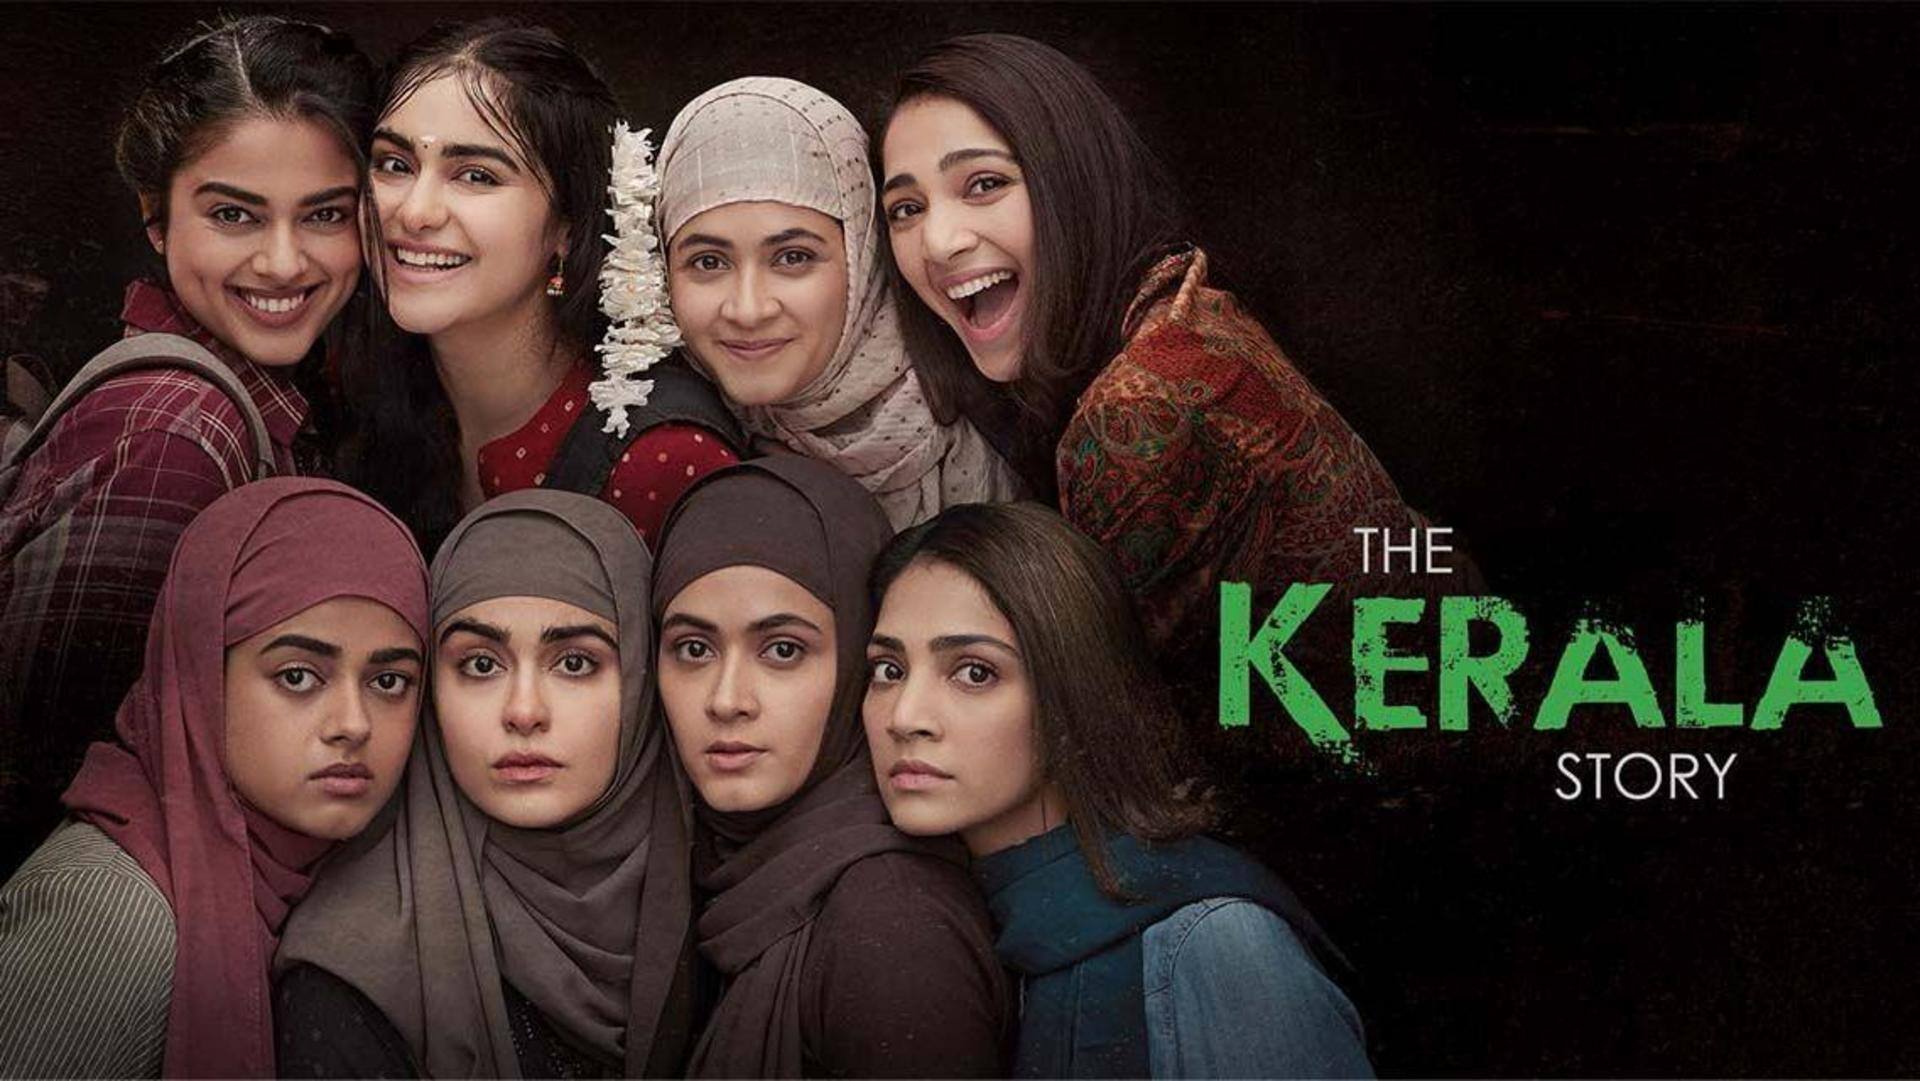 #BoxOfficeCollection: 'The Kerala Story' stays quite steady